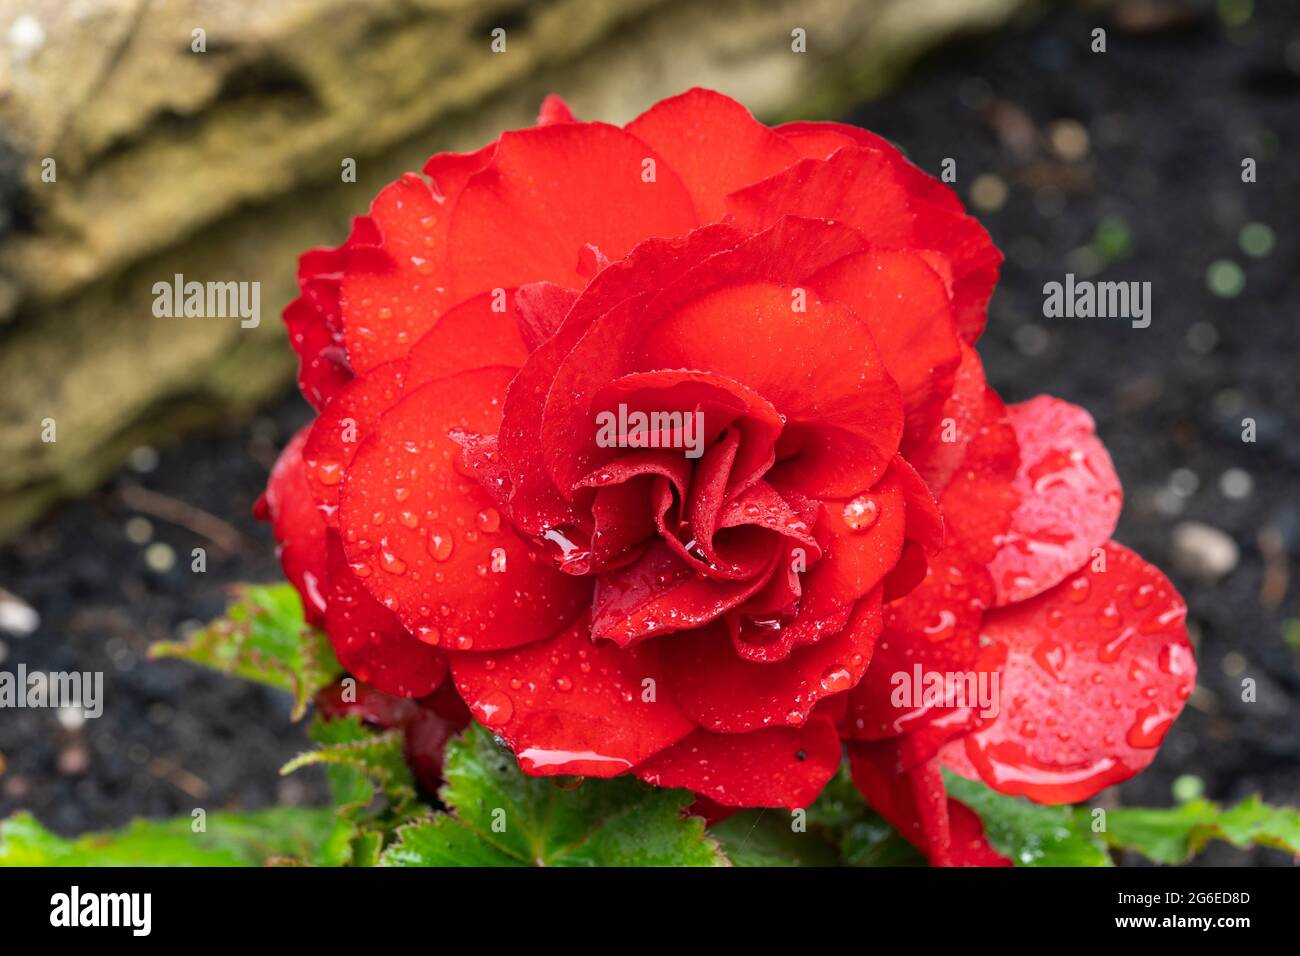 Begonia nonstop F1 red (Tuberhybrida Begonia, Begonia Tuberhybrida) flowering in July in a garden with scarlet red double flowers with raindrops. UK Stock Photo